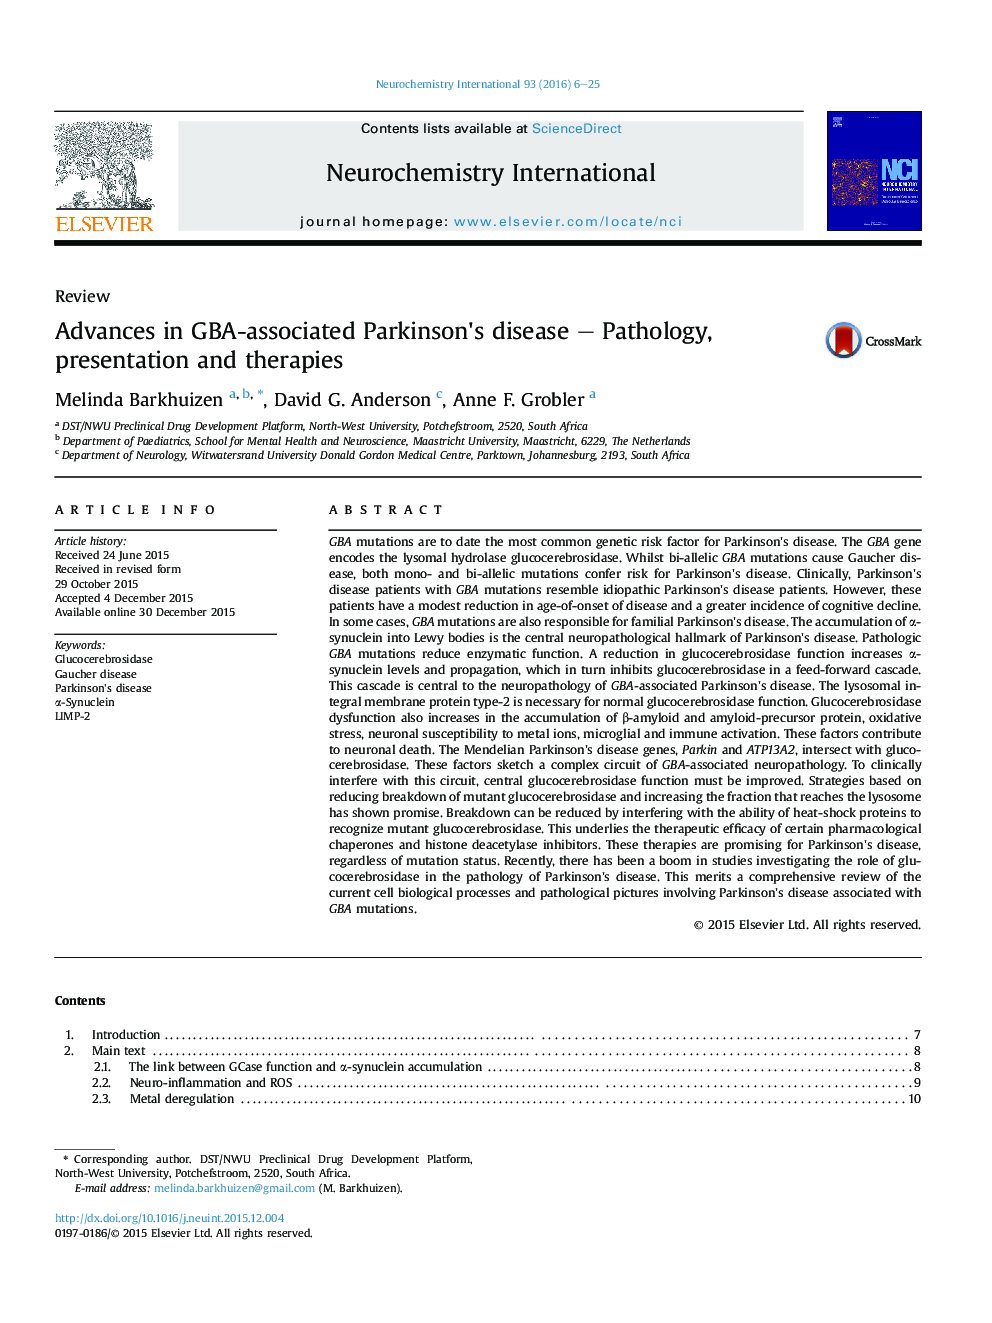 Advances in GBA-associated Parkinson's disease – Pathology, presentation and therapies